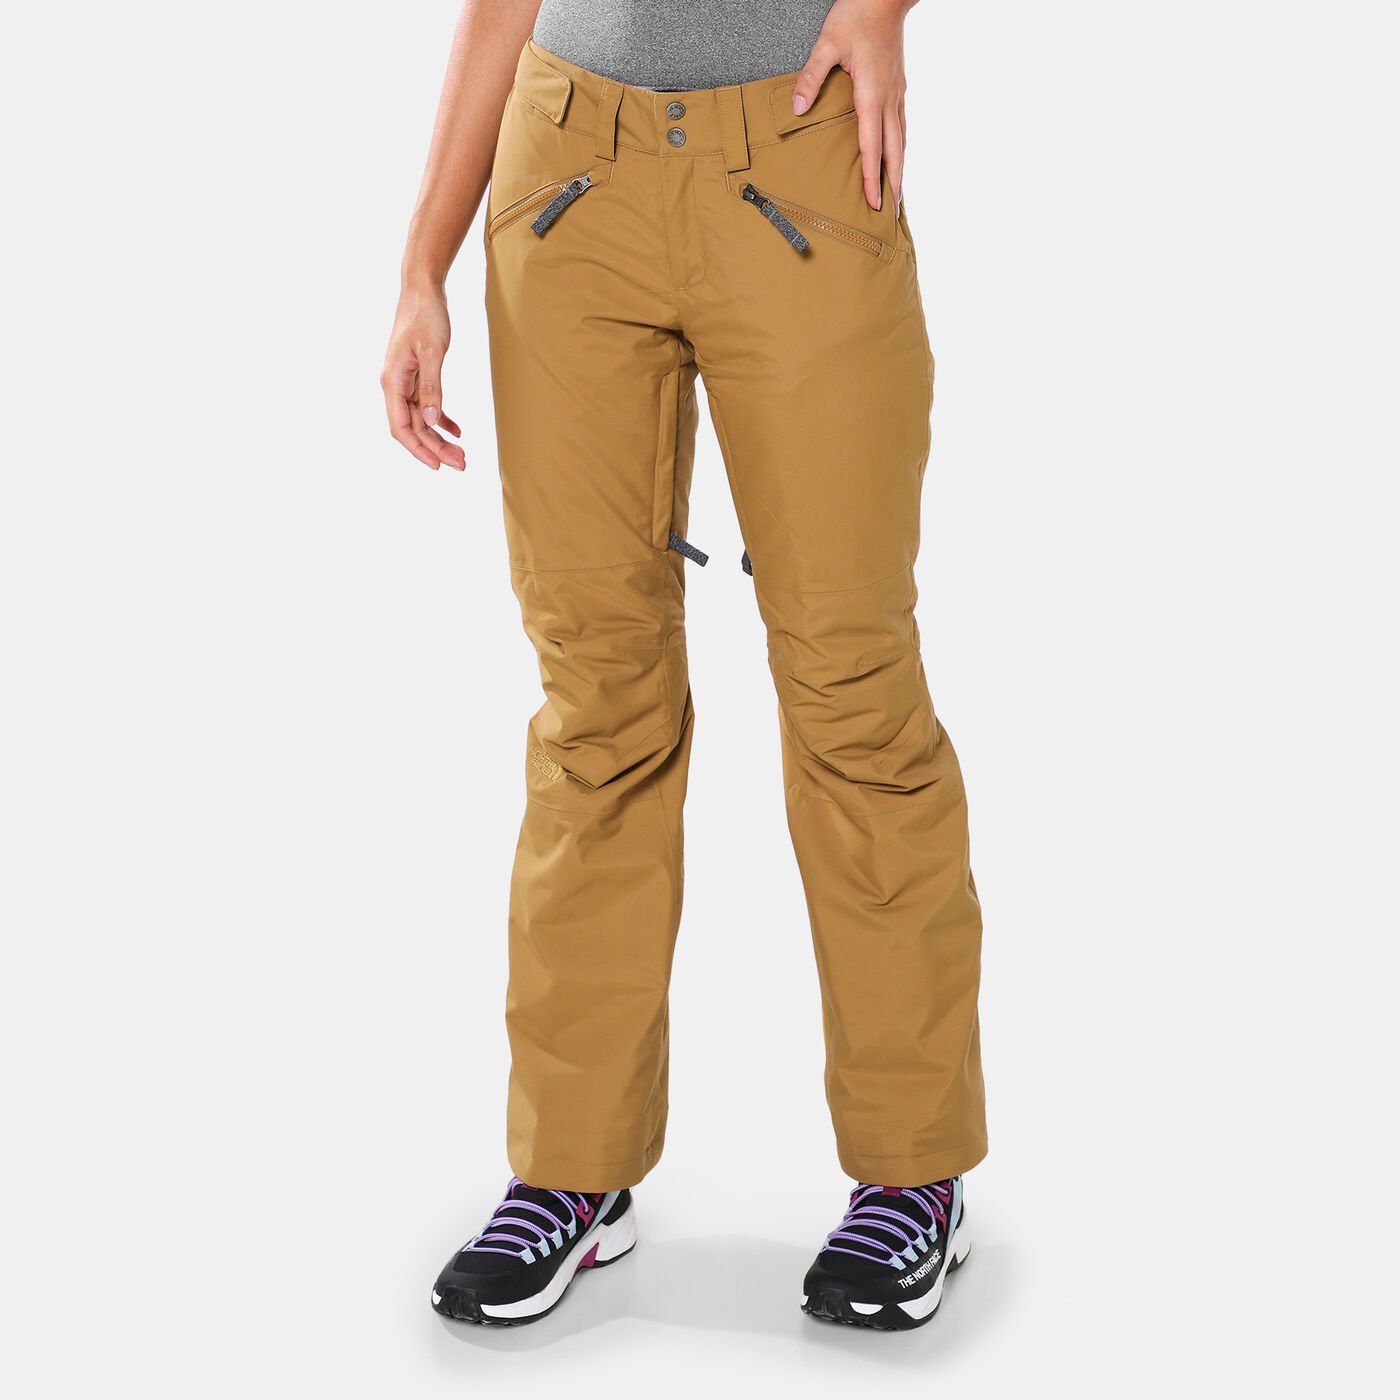 Women's About Day Pants